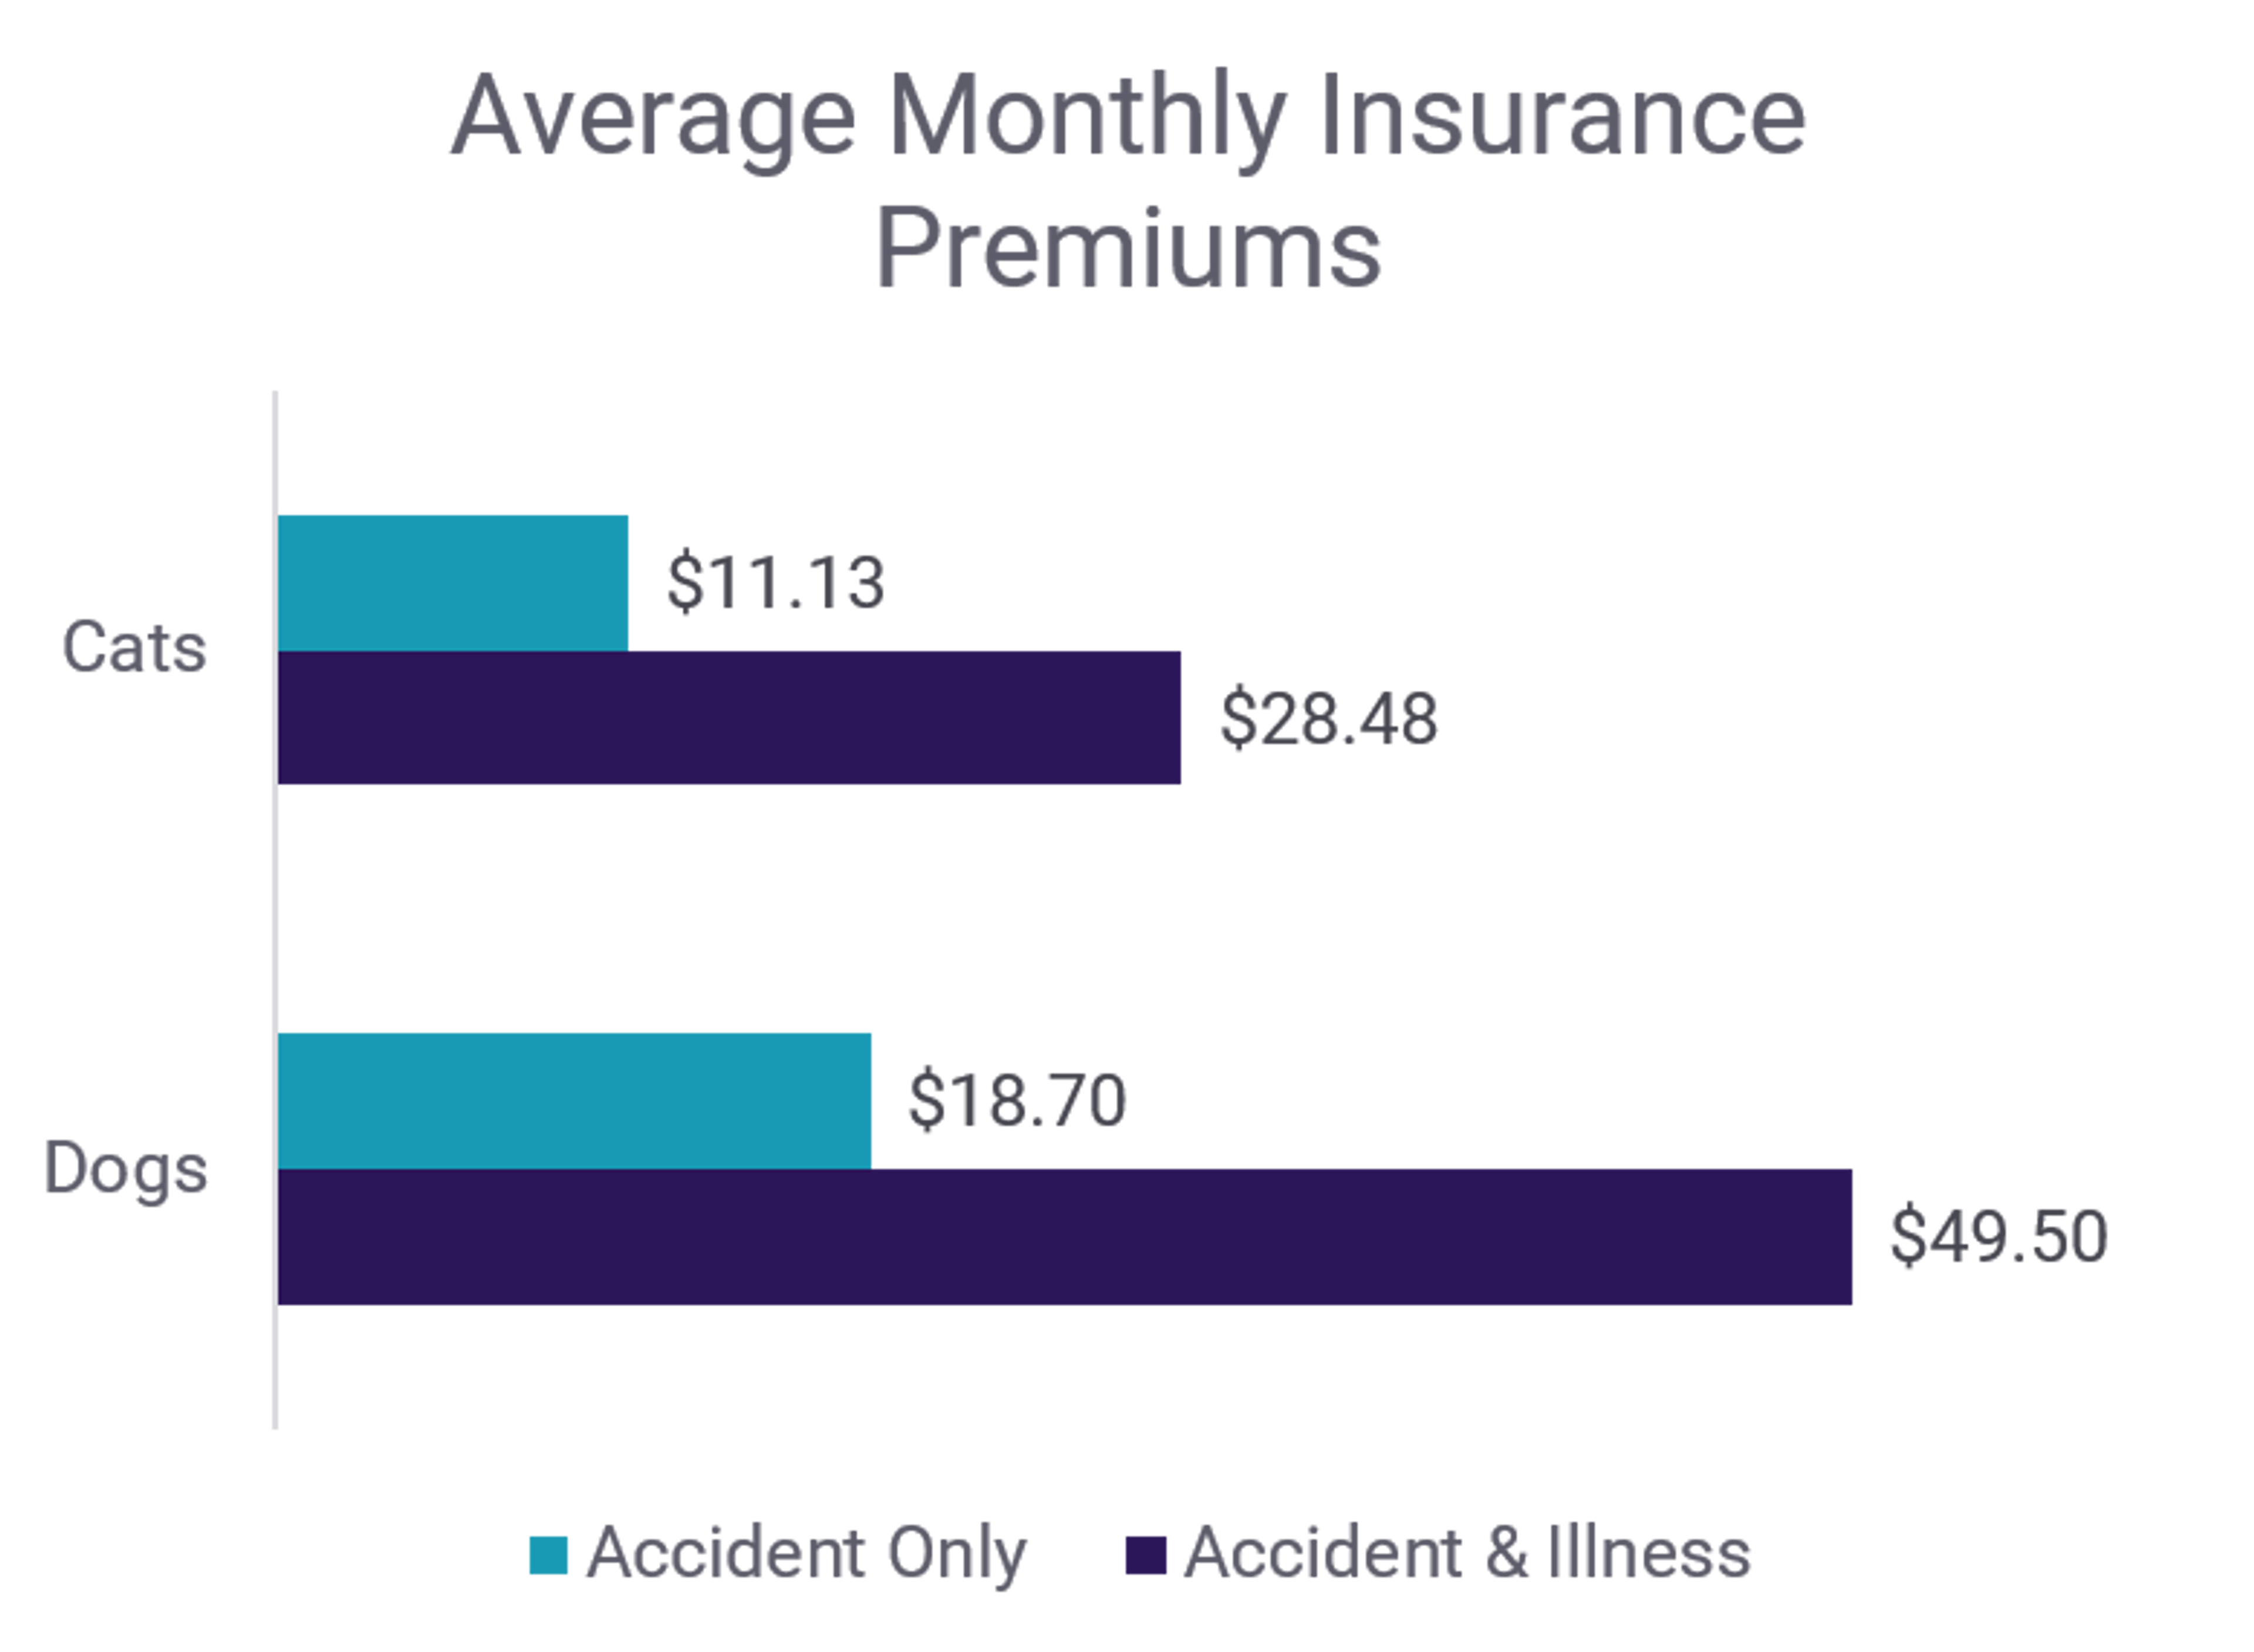 bar graph of accident-only and accident and illness pet insurance cost